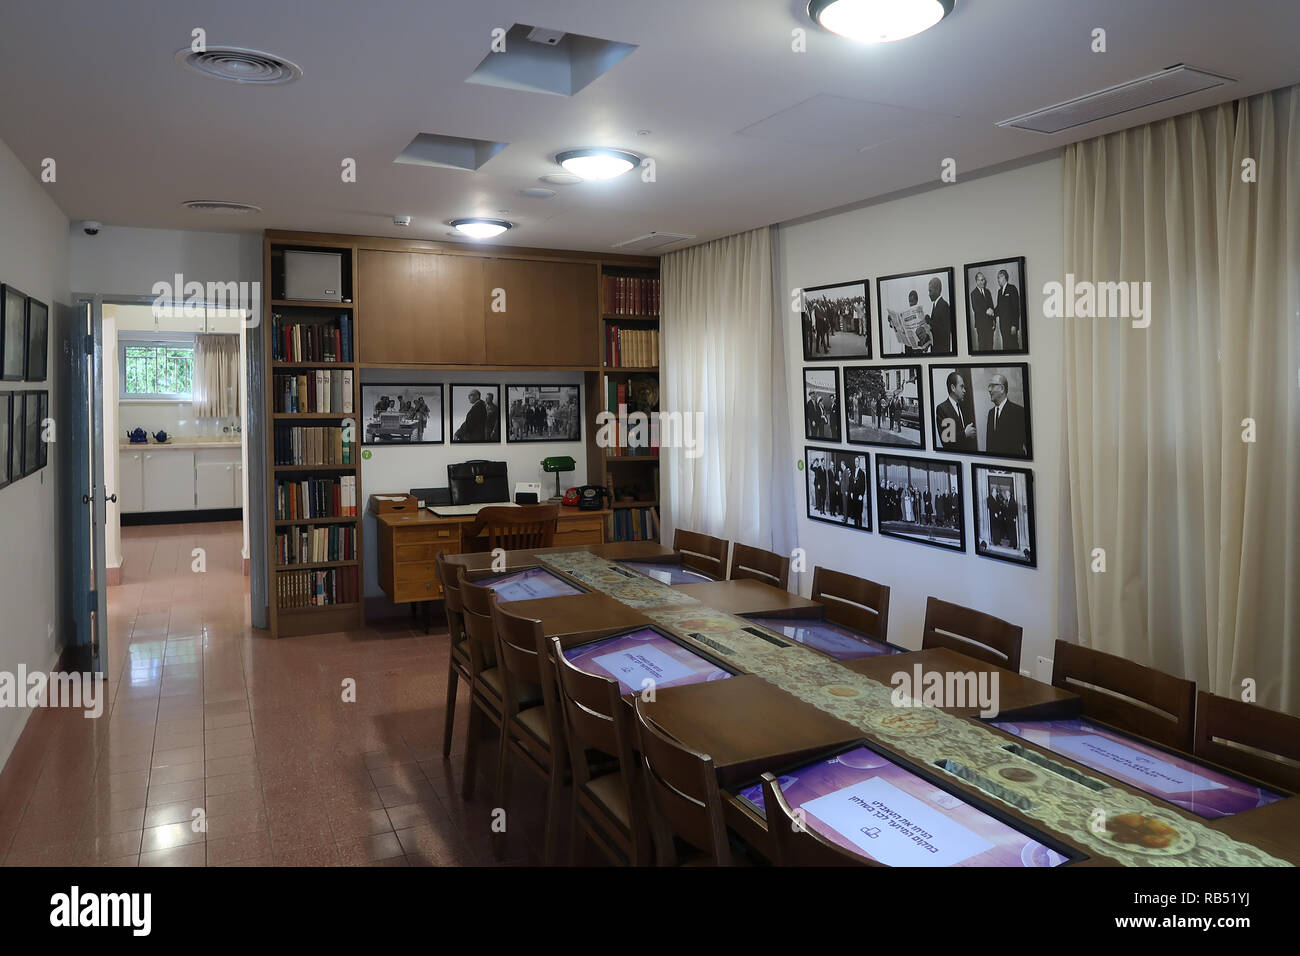 The study room at the former official residence of  Levi Eshkol Israel’s fourth Prime Minister, serving from 1964-1969 located in Rehavia also Rechavia neighborhood in West Jerusalem Israel. The house which serves now as museum memorializes Eshkol and also serves as the new headquarters for the SPNI’s Jerusalem community branch, a hub for social-environmental activism. Stock Photo